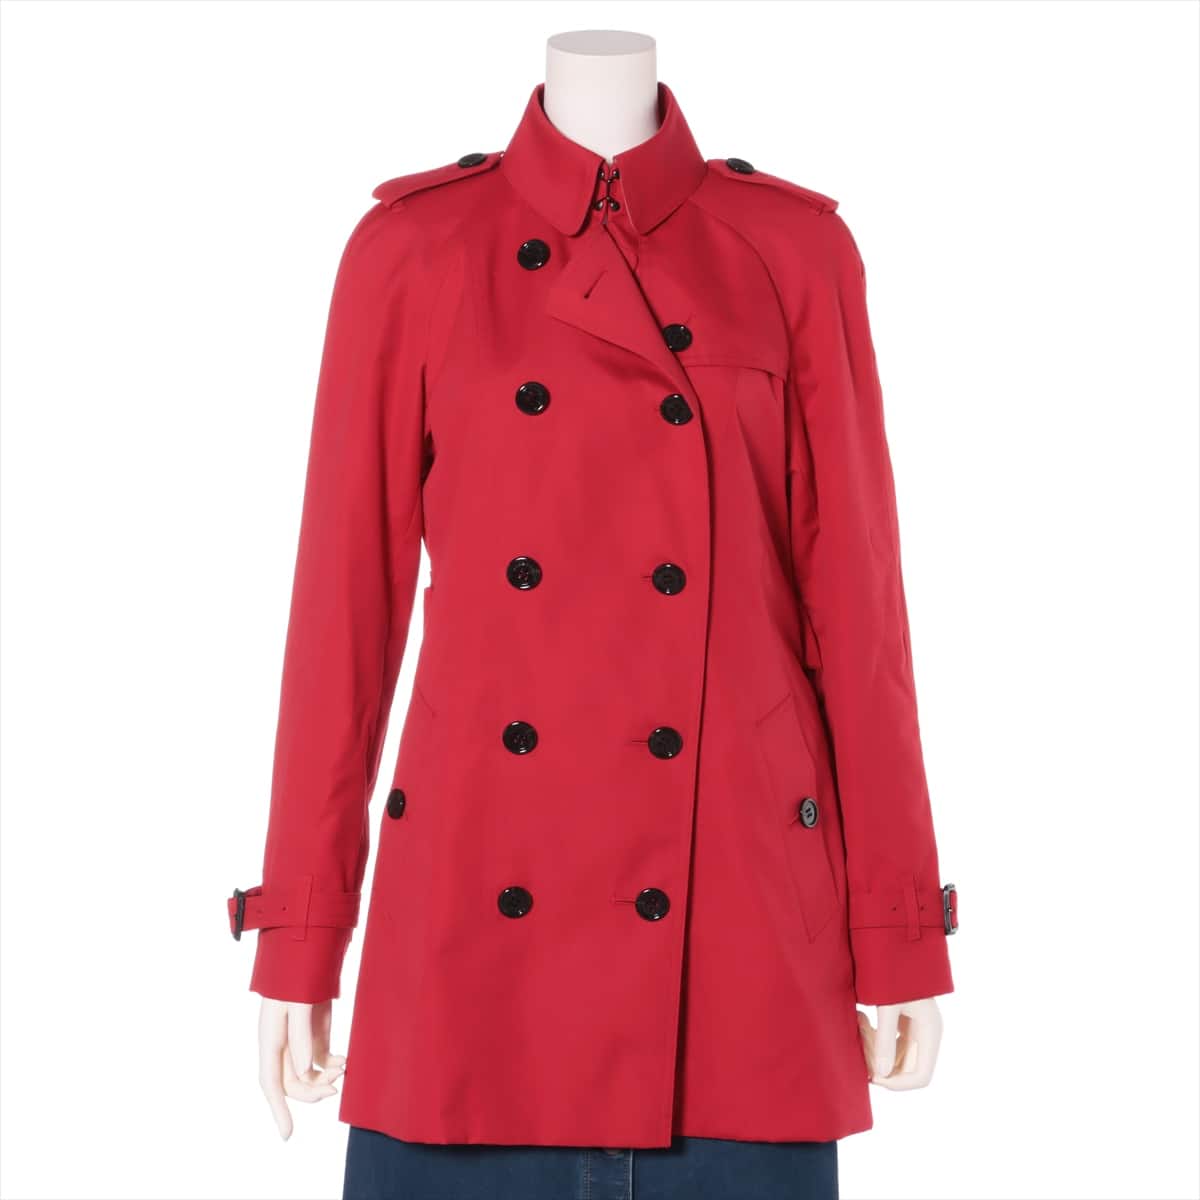 Burberry London Cotton & Polyester Trench coat 40 Ladies' Red  Nova check lining